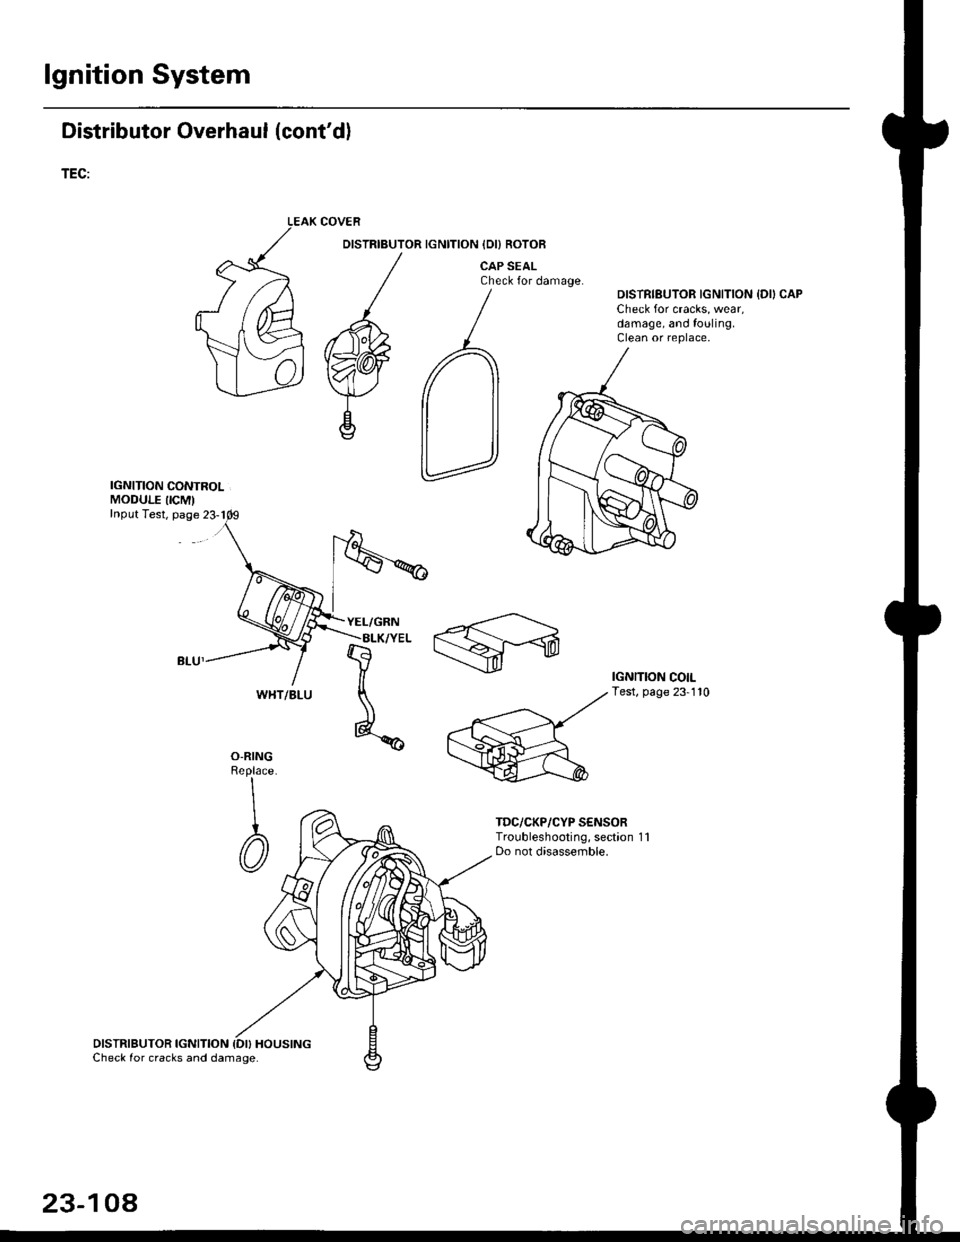 HONDA CIVIC 1997 6.G Owners Manual lgnition System
Distributor Overhaul (contdl
TEC:
IGNITION CONTROLMODULE IICMInput Test, page 23-1
DISTRIBUTOR IGNITION {DI} HOUSINGCheck for cracks and damage.
COVER
DISTRIBUTOR IGNITION IDI) ROTOB